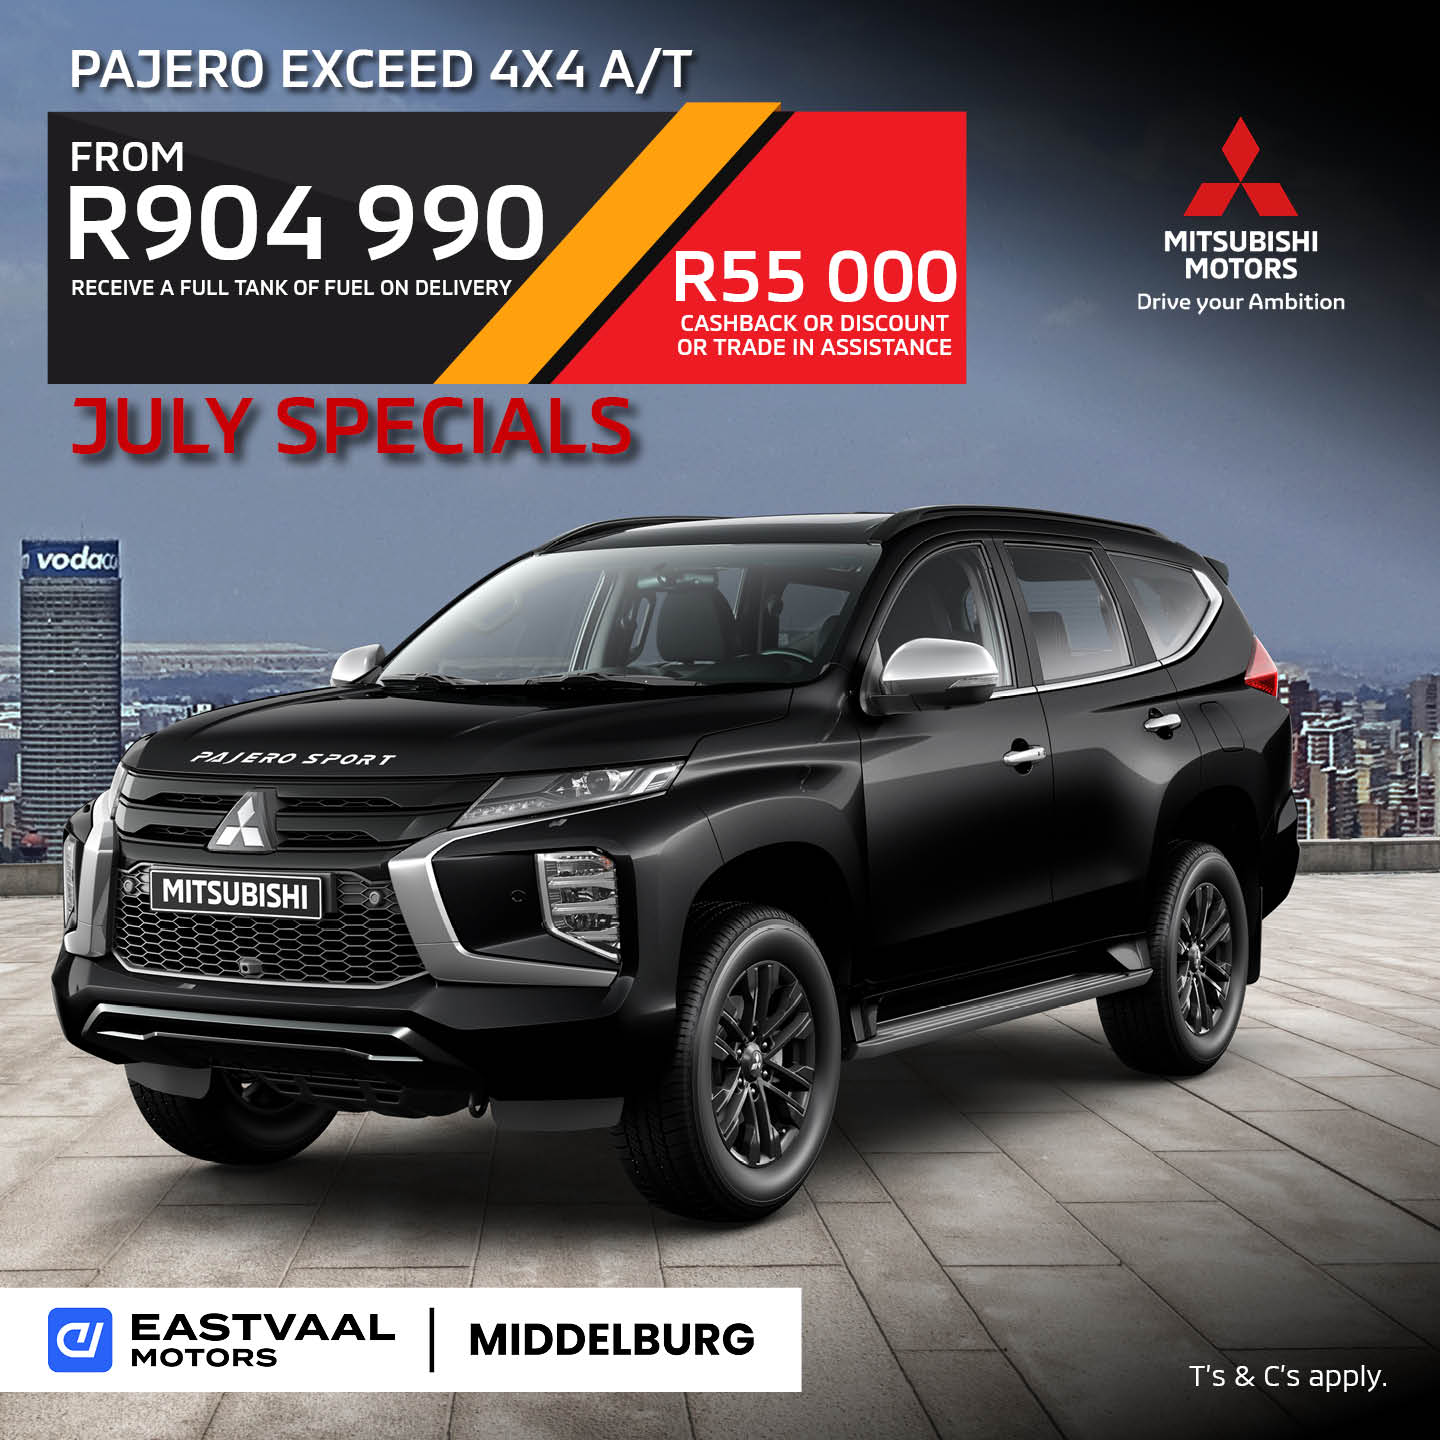 Pajero Exceed 4×4 A/T image from 